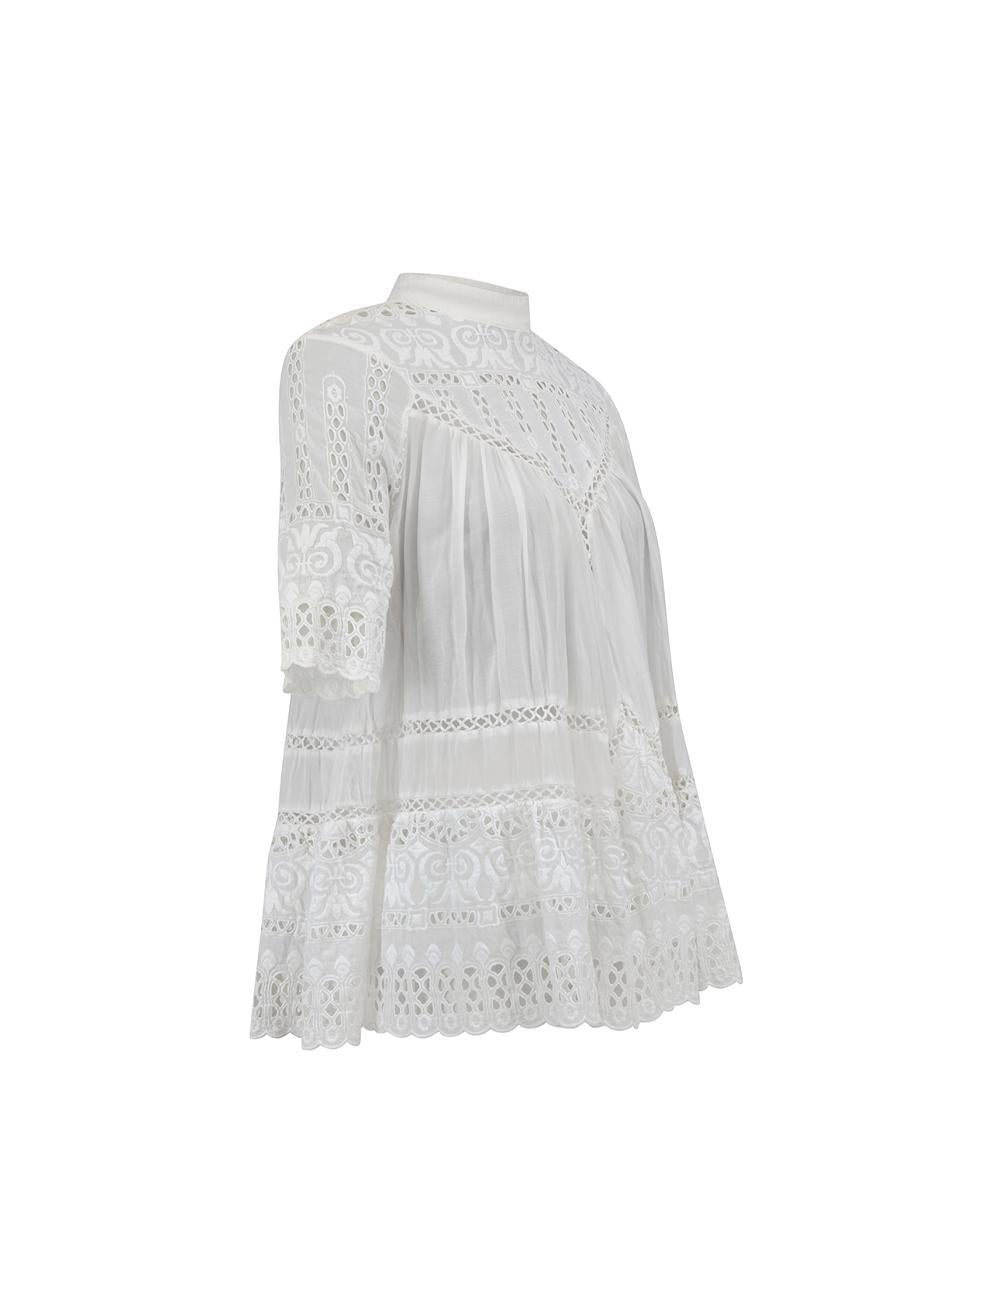 CONDITION is Very good. Minimal wear to top is evident. Minimal wear to the front neckline with small mark and the unravelling of the embroidery on this used Zimmermann designer resale item.



Details


White

Cotton

Sheer

Broderie 1/2 sleeved